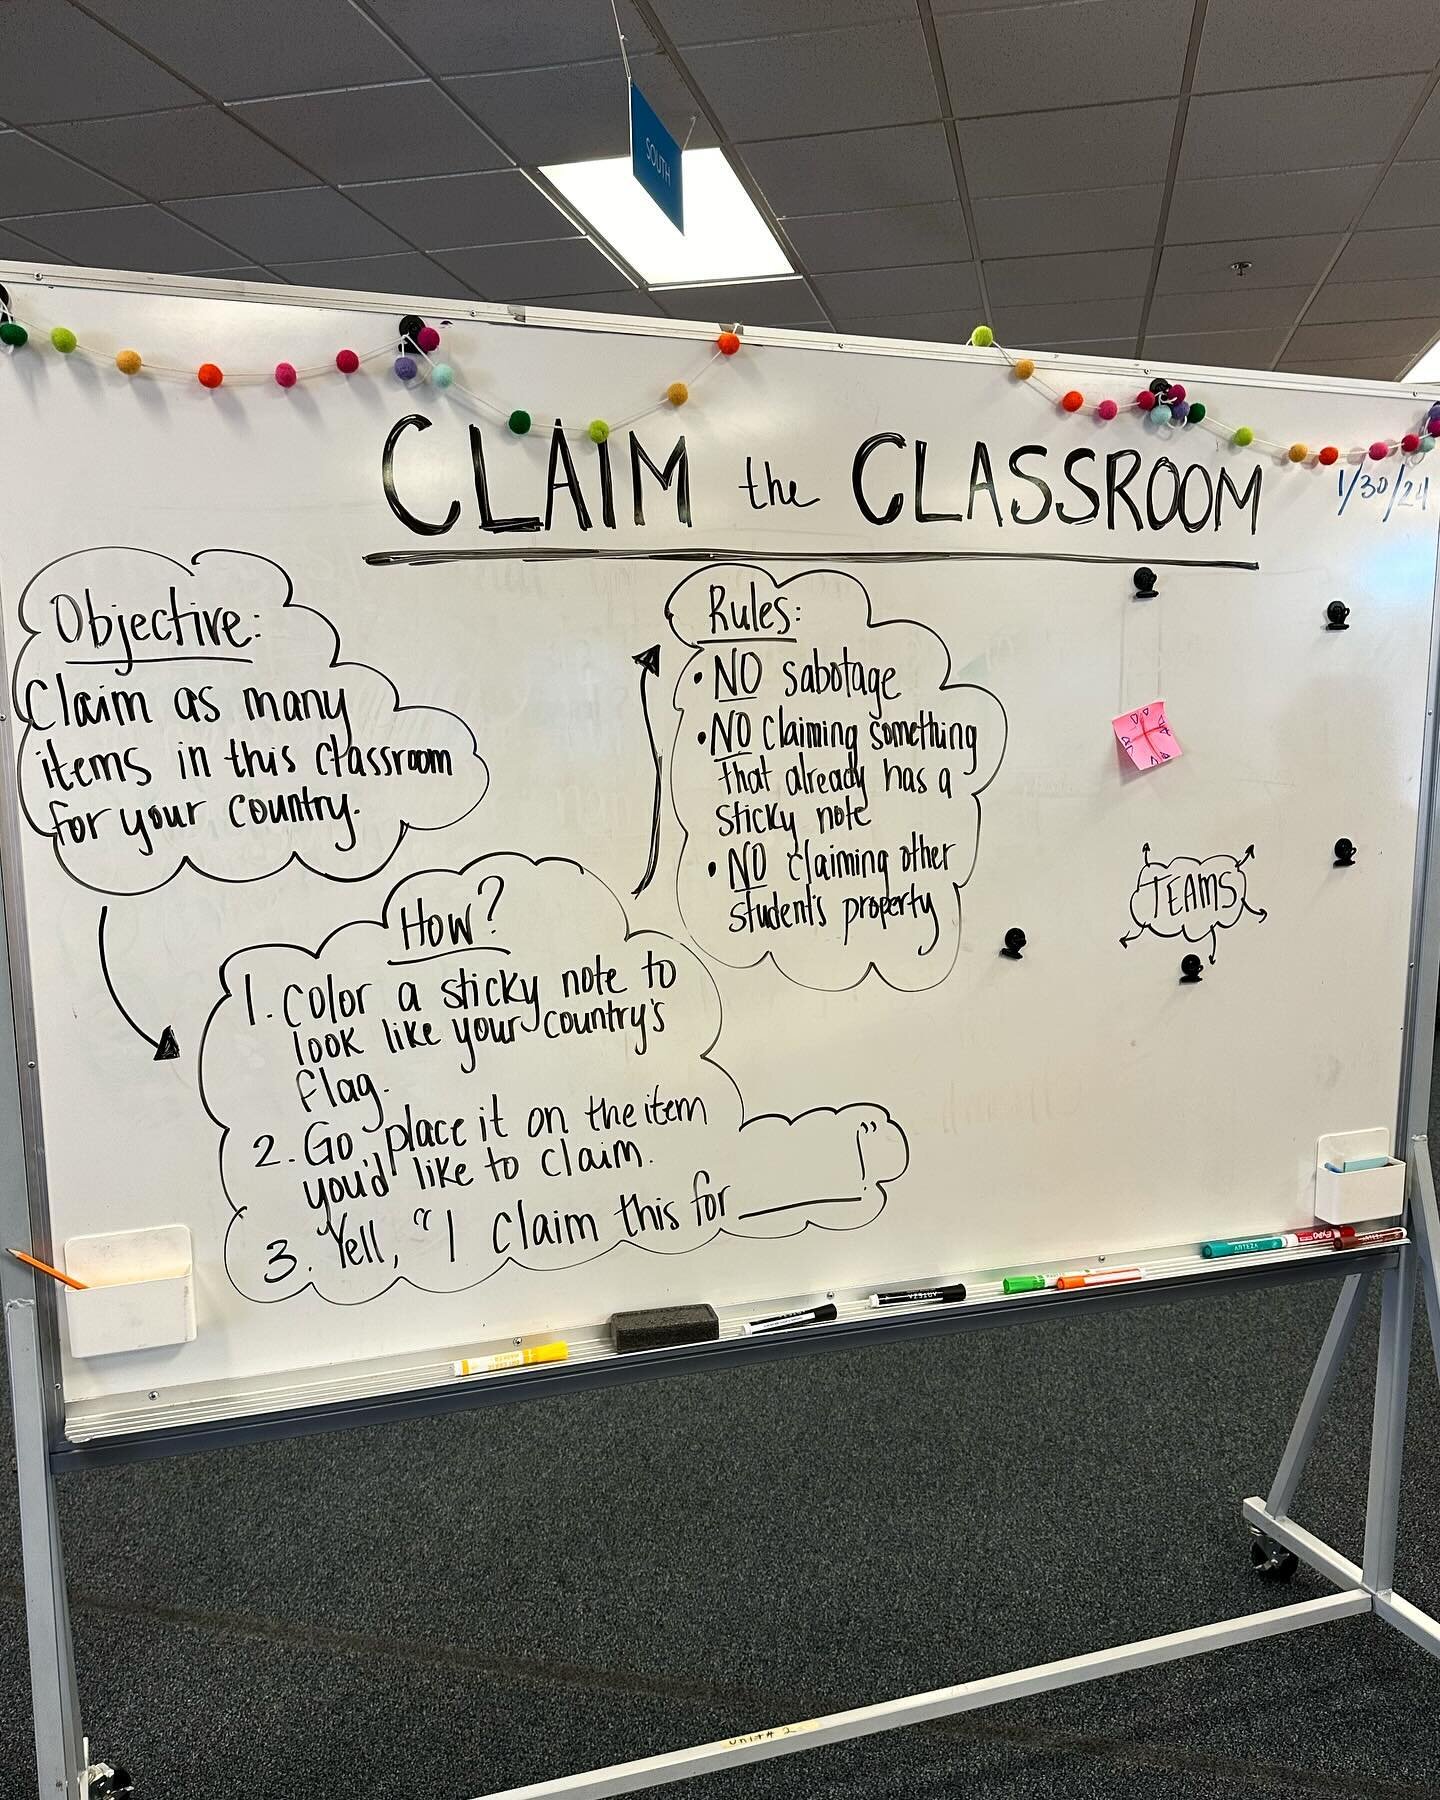 LAUNCH DAY: Students in 6th-8th grades started a new project today with an activity called &ldquo;Claim the Classroom.&rdquo; What topic do you think they&rsquo;re exploring next???

#PBLatPIA #projectlaunch #BelongatPIA #comeasyouare #allarewelcomeh